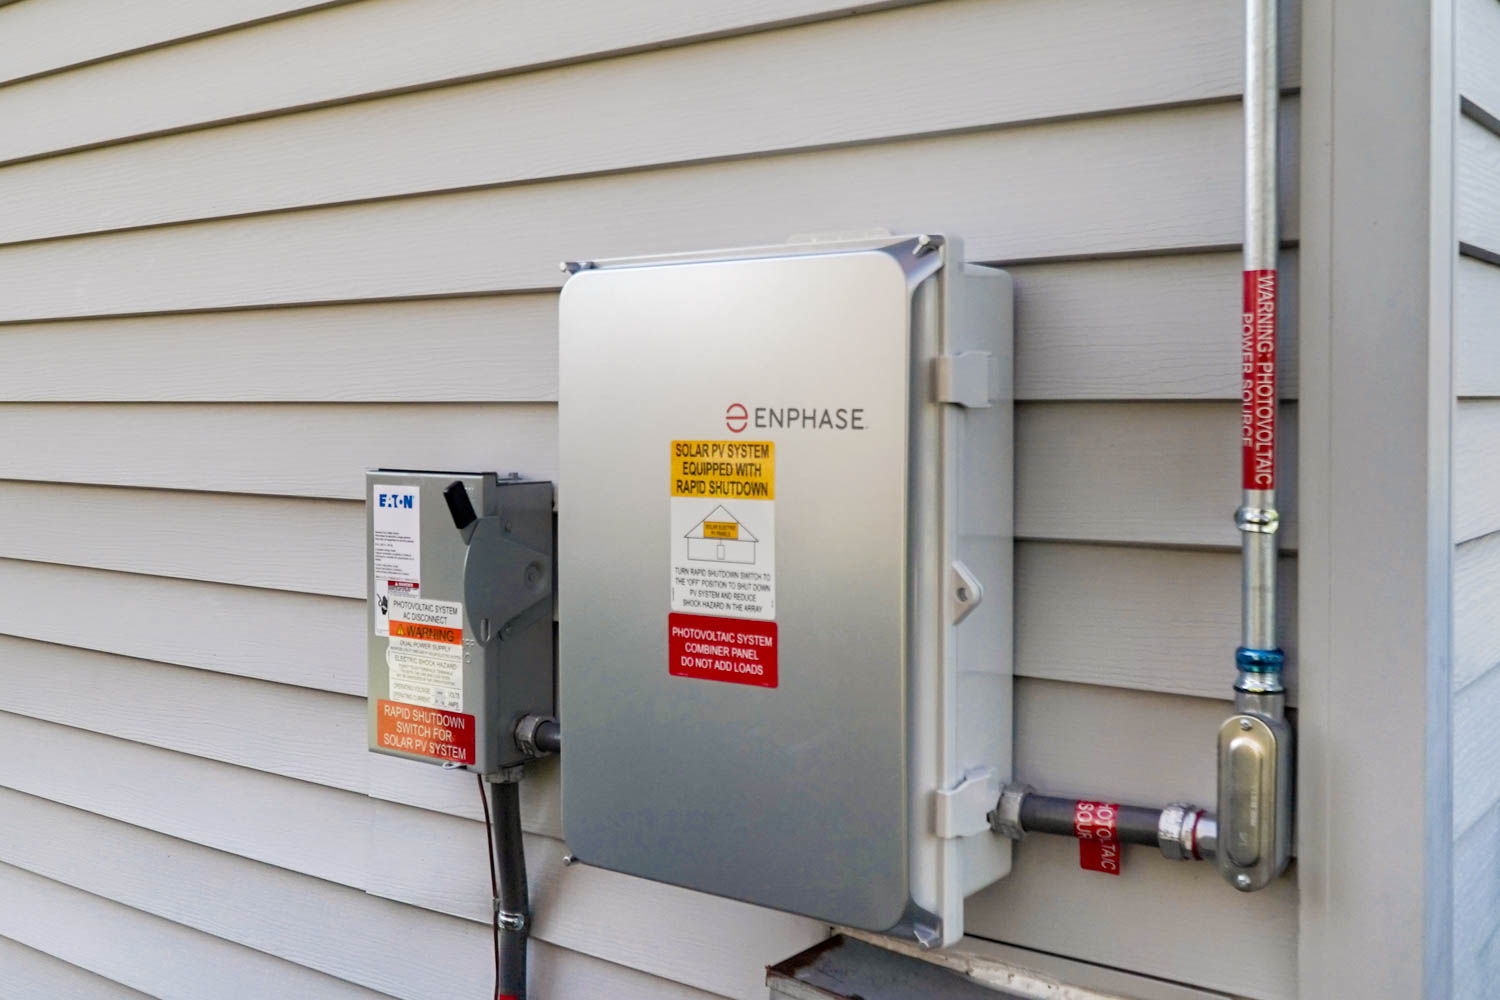 Enphase electrical box for home solar system with red and white warning sign. 